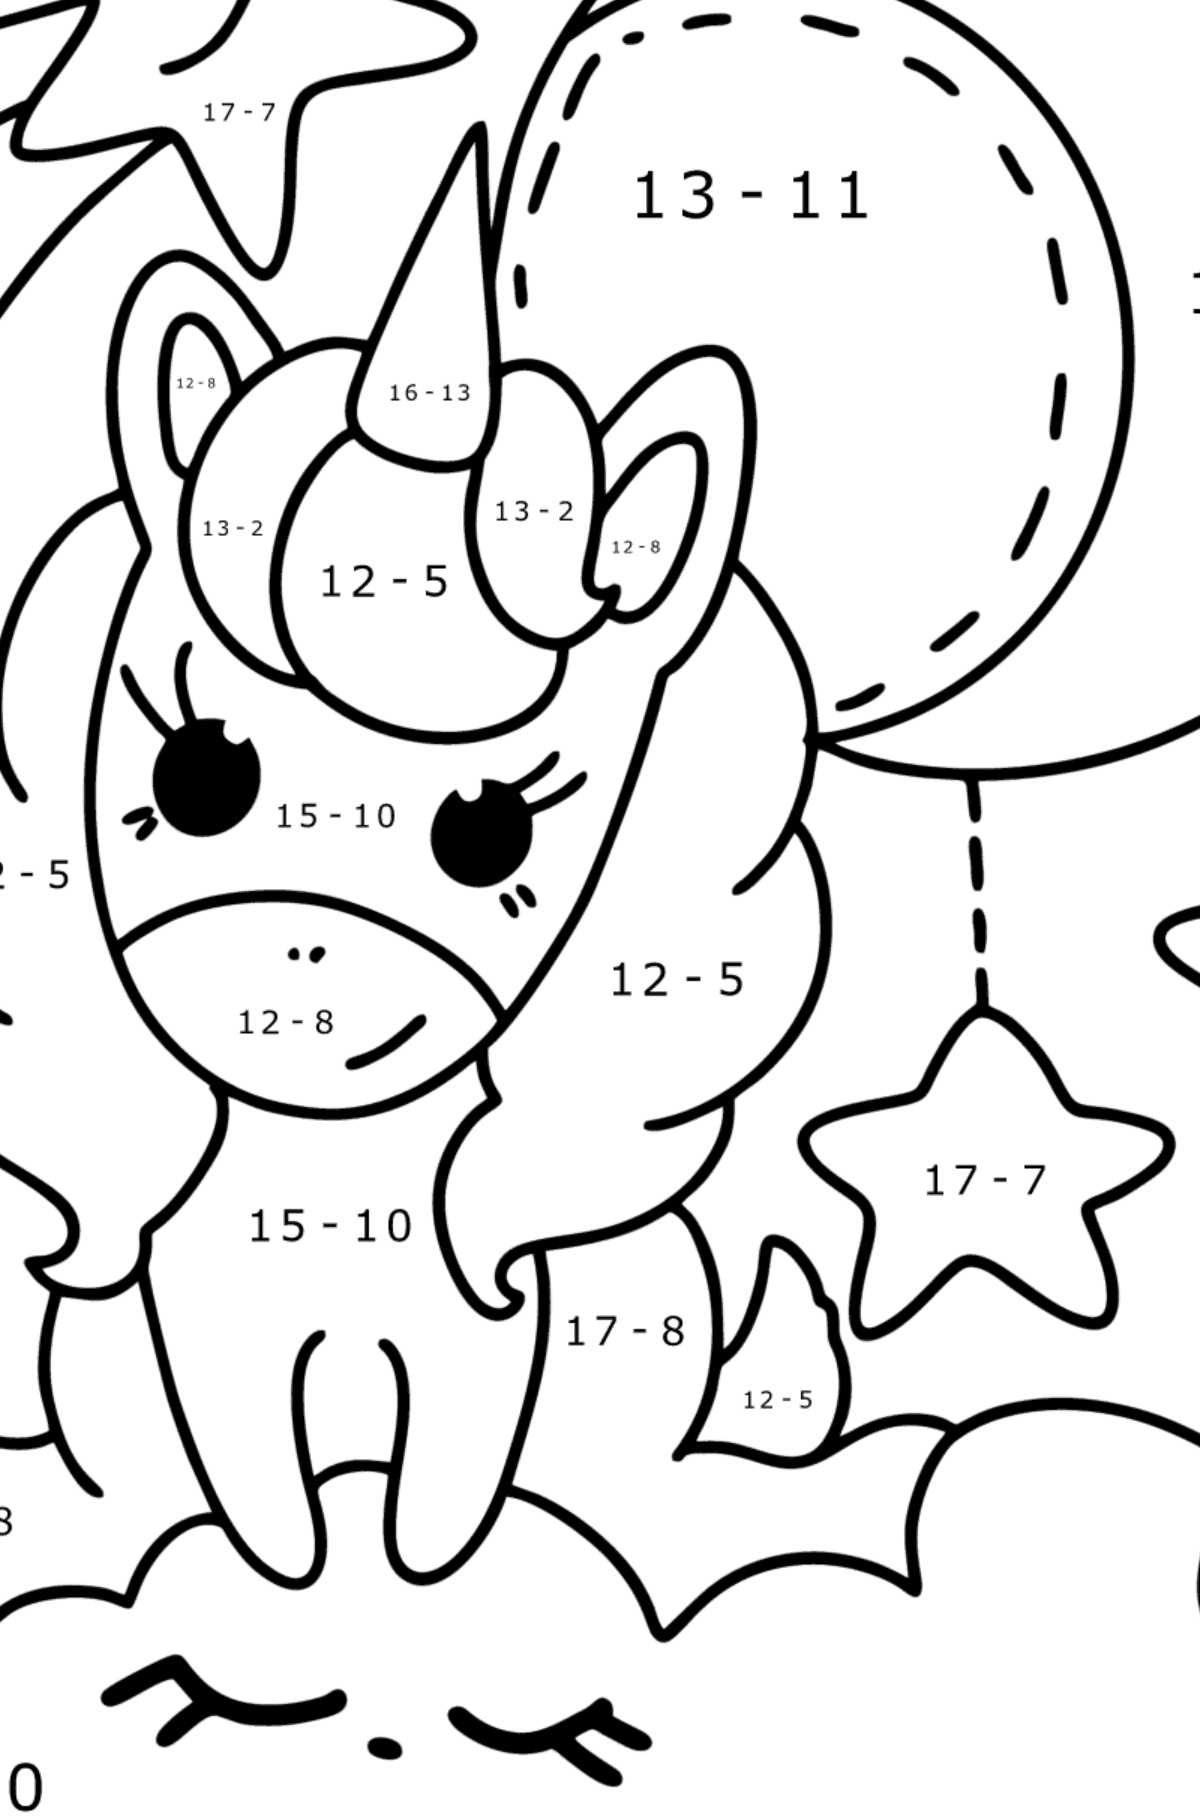 Moon unicorn coloring page - Math Coloring - Subtraction for Kids